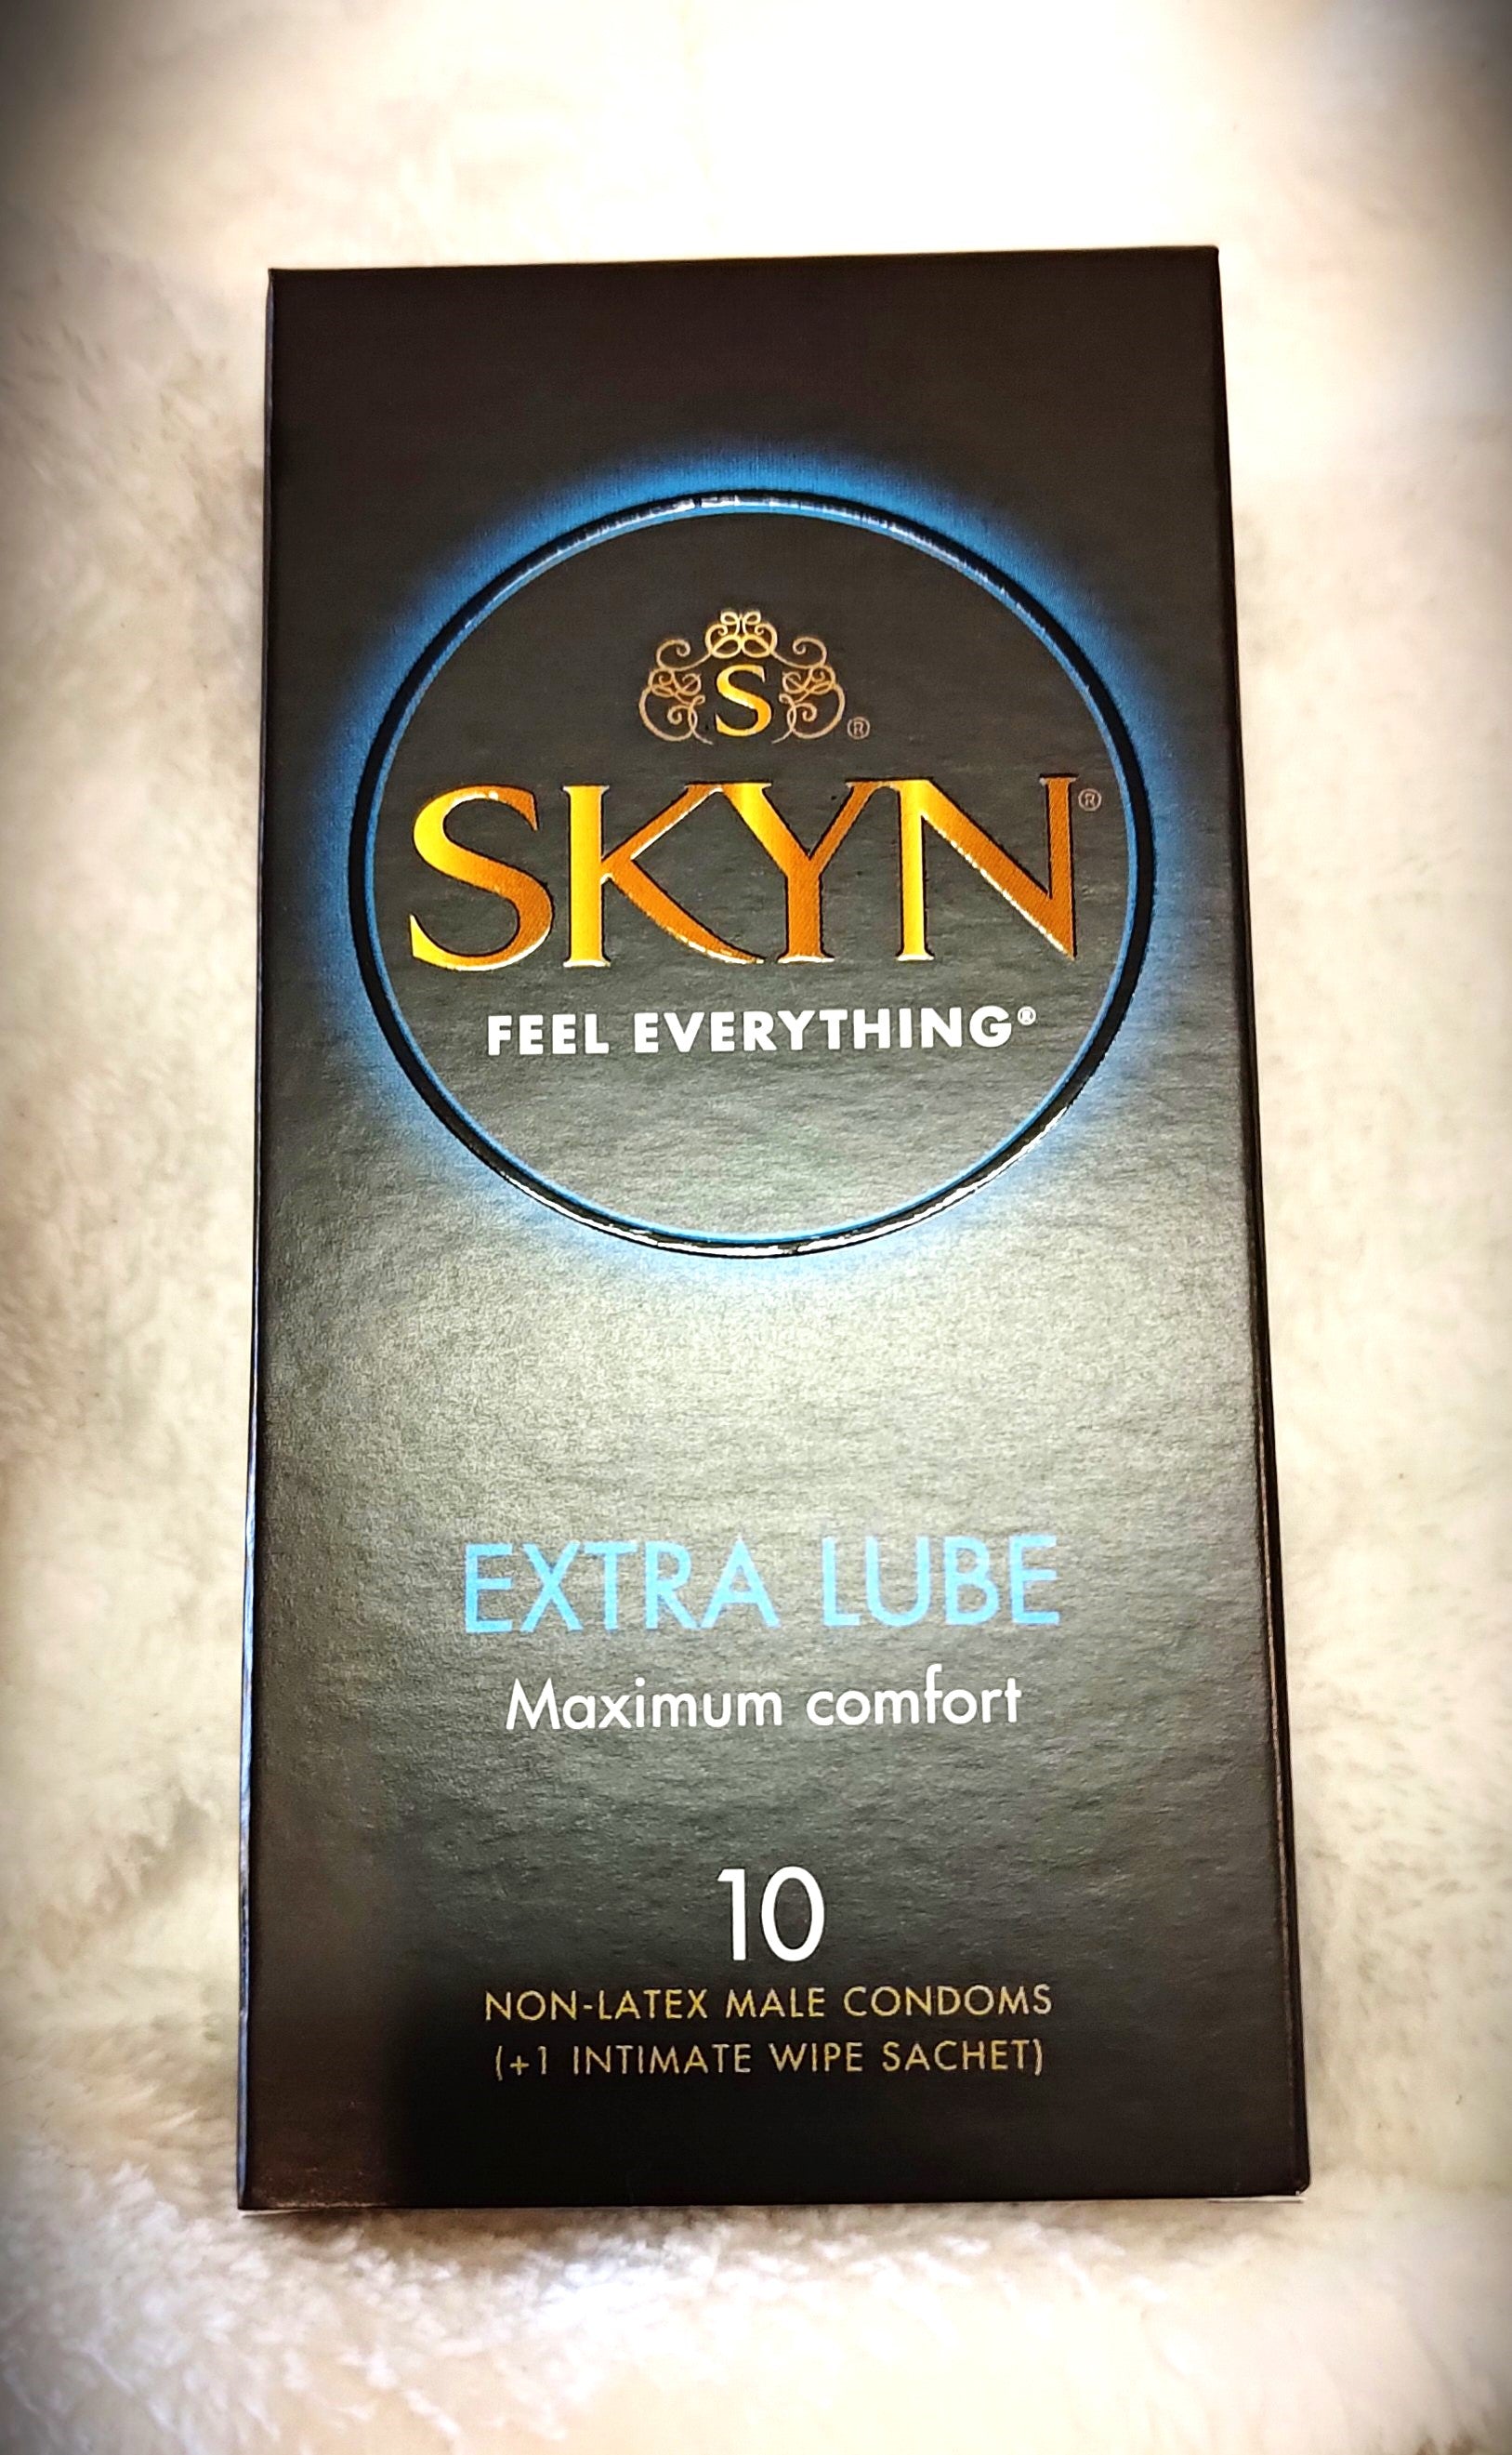 Lifestyles Skyn - Extra Lubricated - 10 NON Latex Condoms Retail Pack